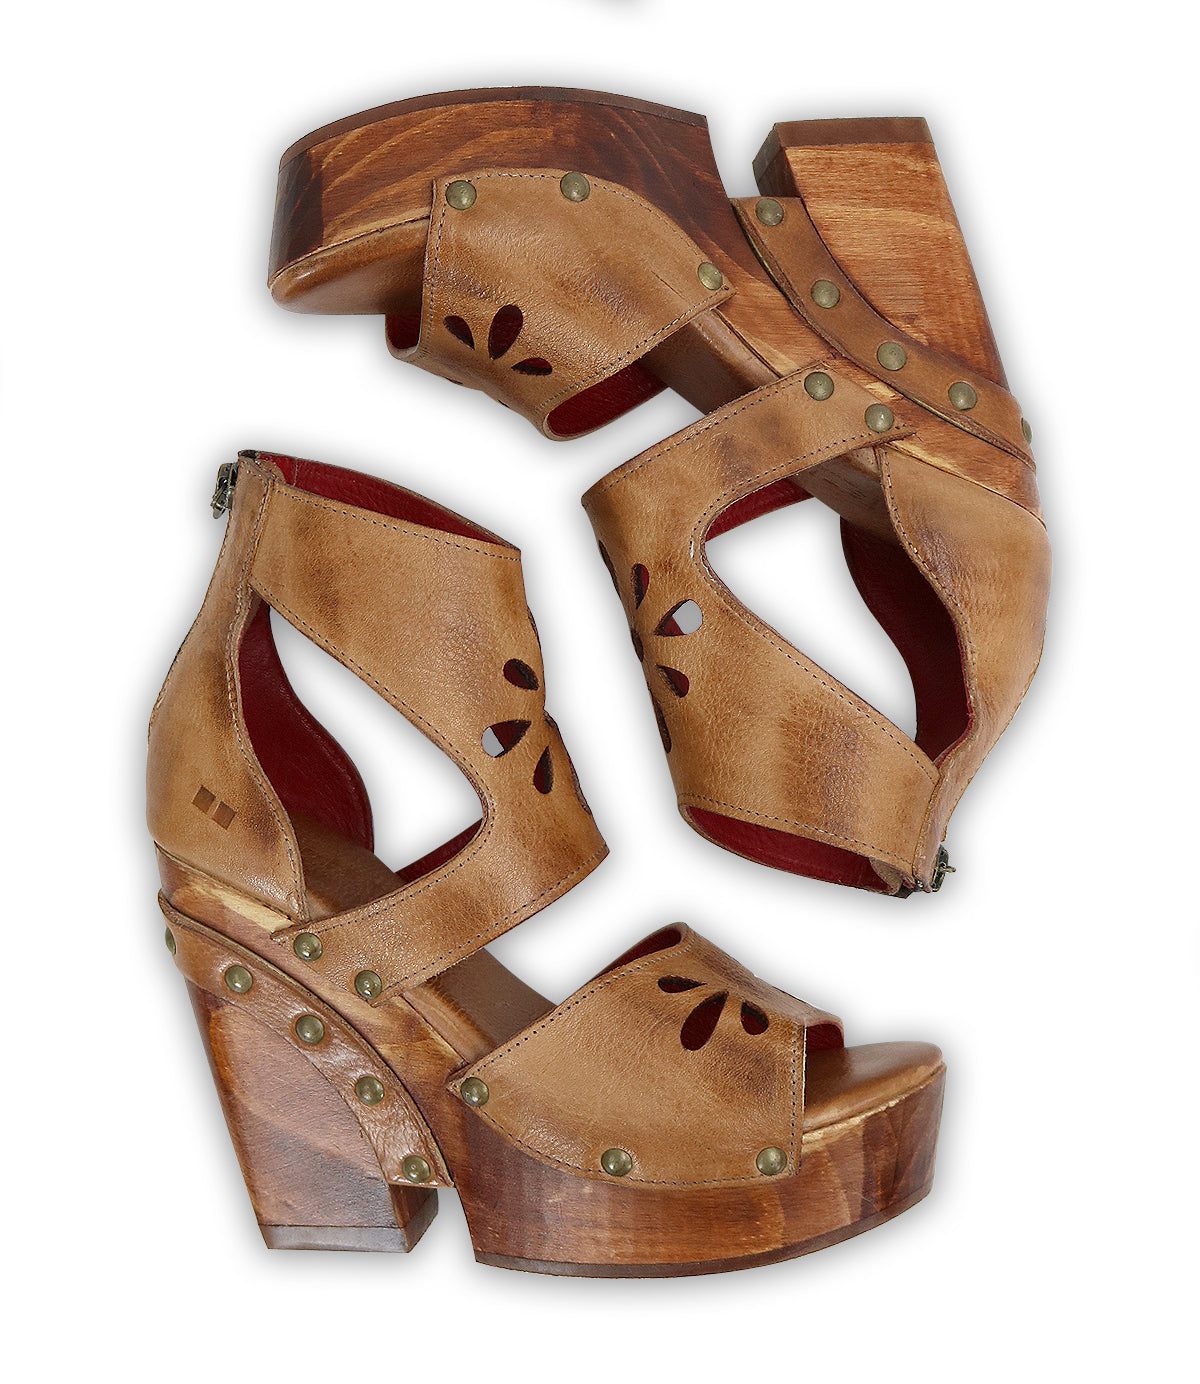 A pair of Lucrative sandals with a Bed Stu wooden wedge heel.